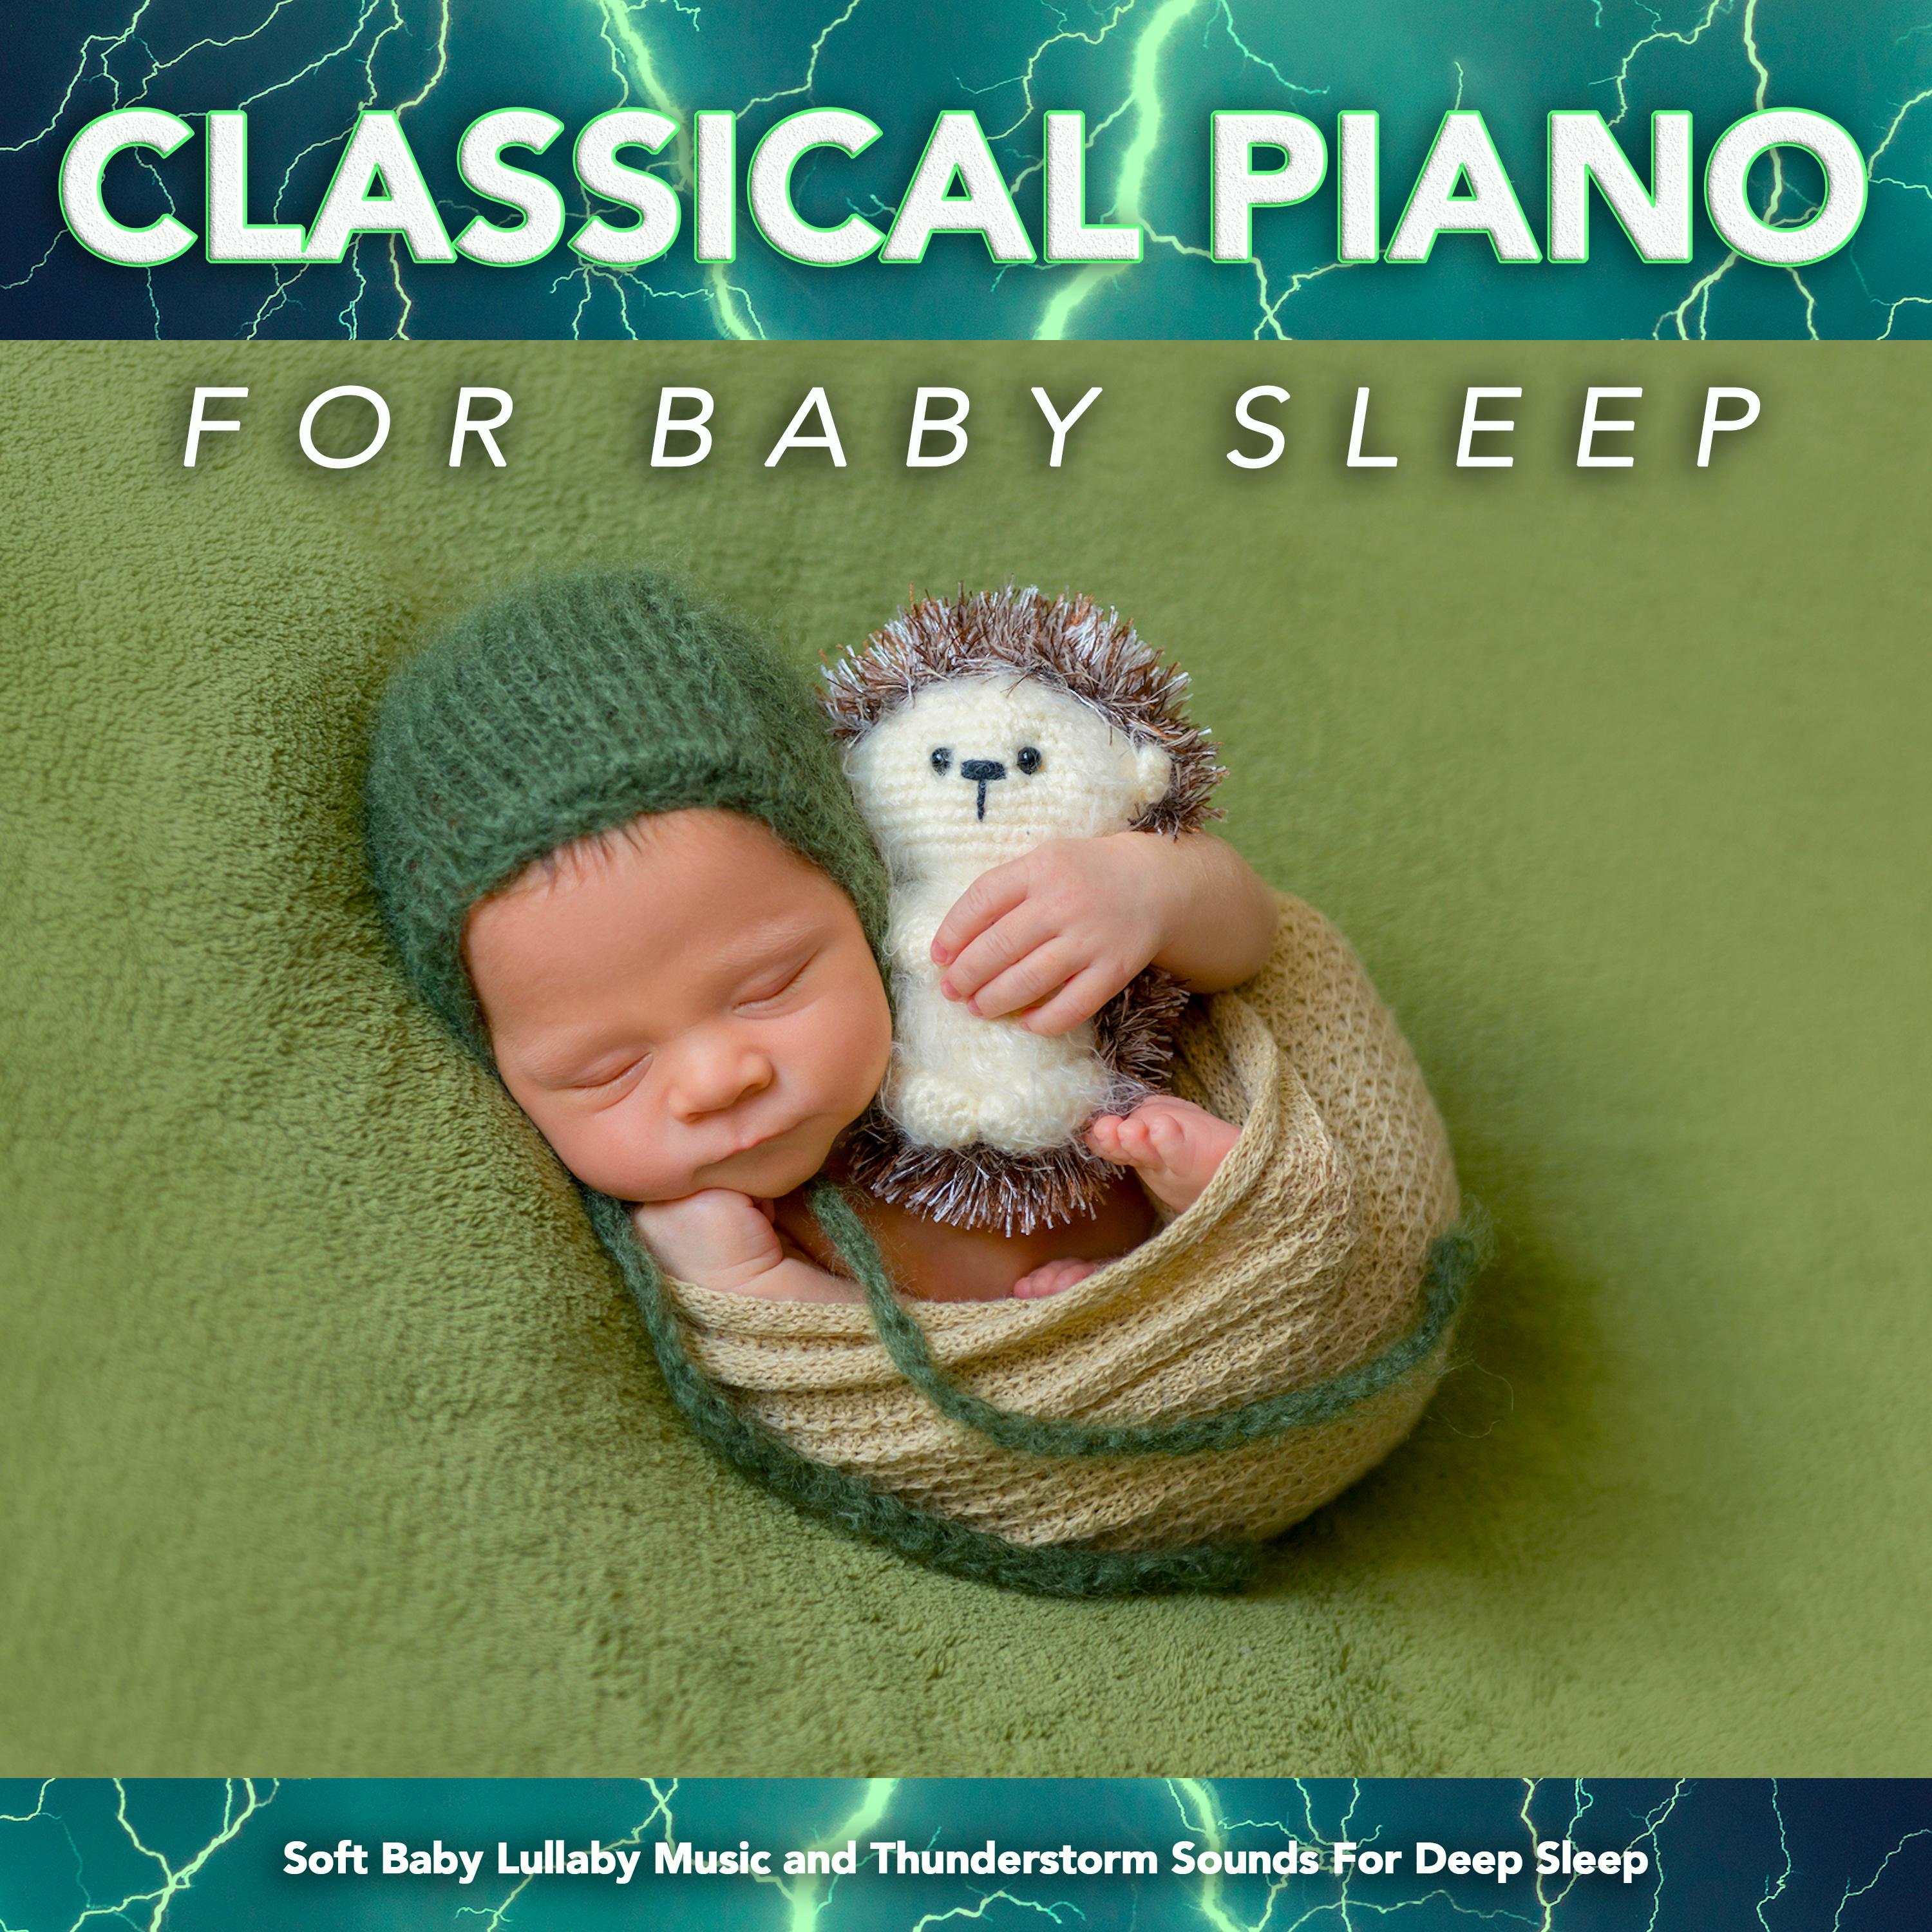 Canon in D - Pachelbel - Soft Baby Lullaby Music - Thunderstorm Sounds - Classical Piano for Baby Sleep